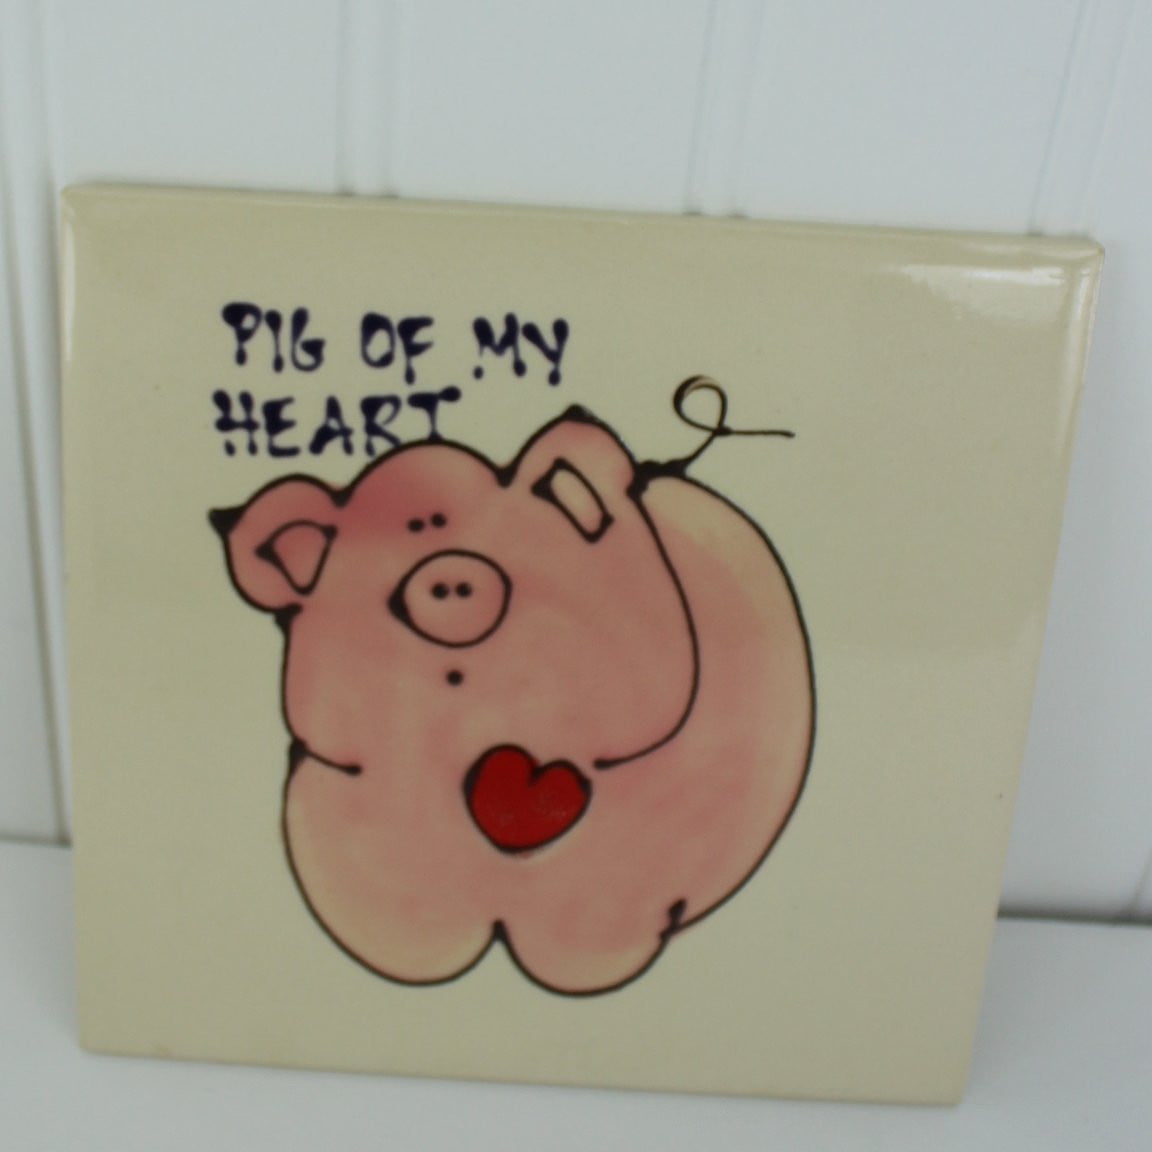 Lovable Pig of My Eye Ardencraft Ceramic Tile Hand Made by Kate Humorous Fun Gift